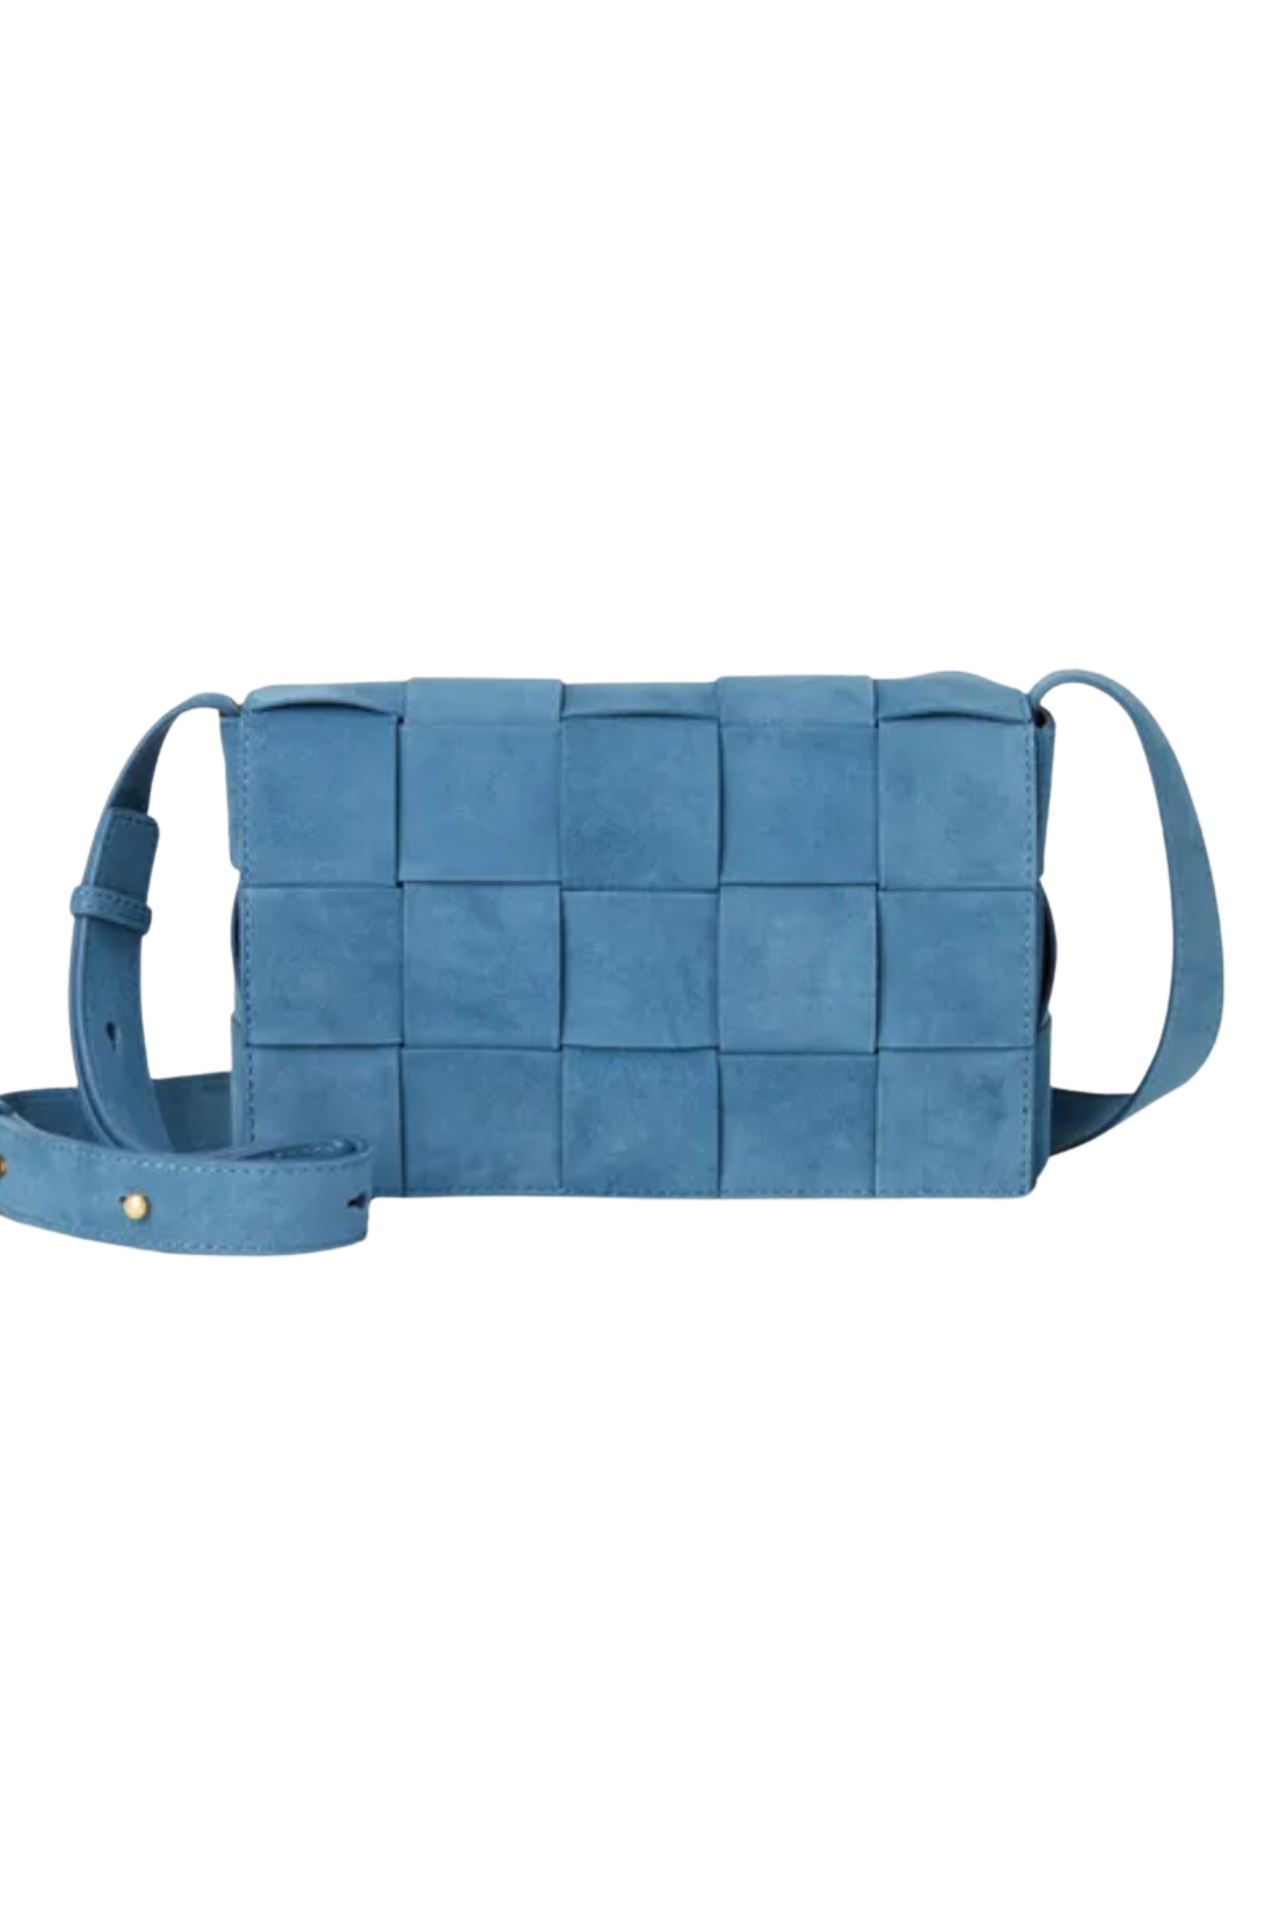 woven leather blue bag